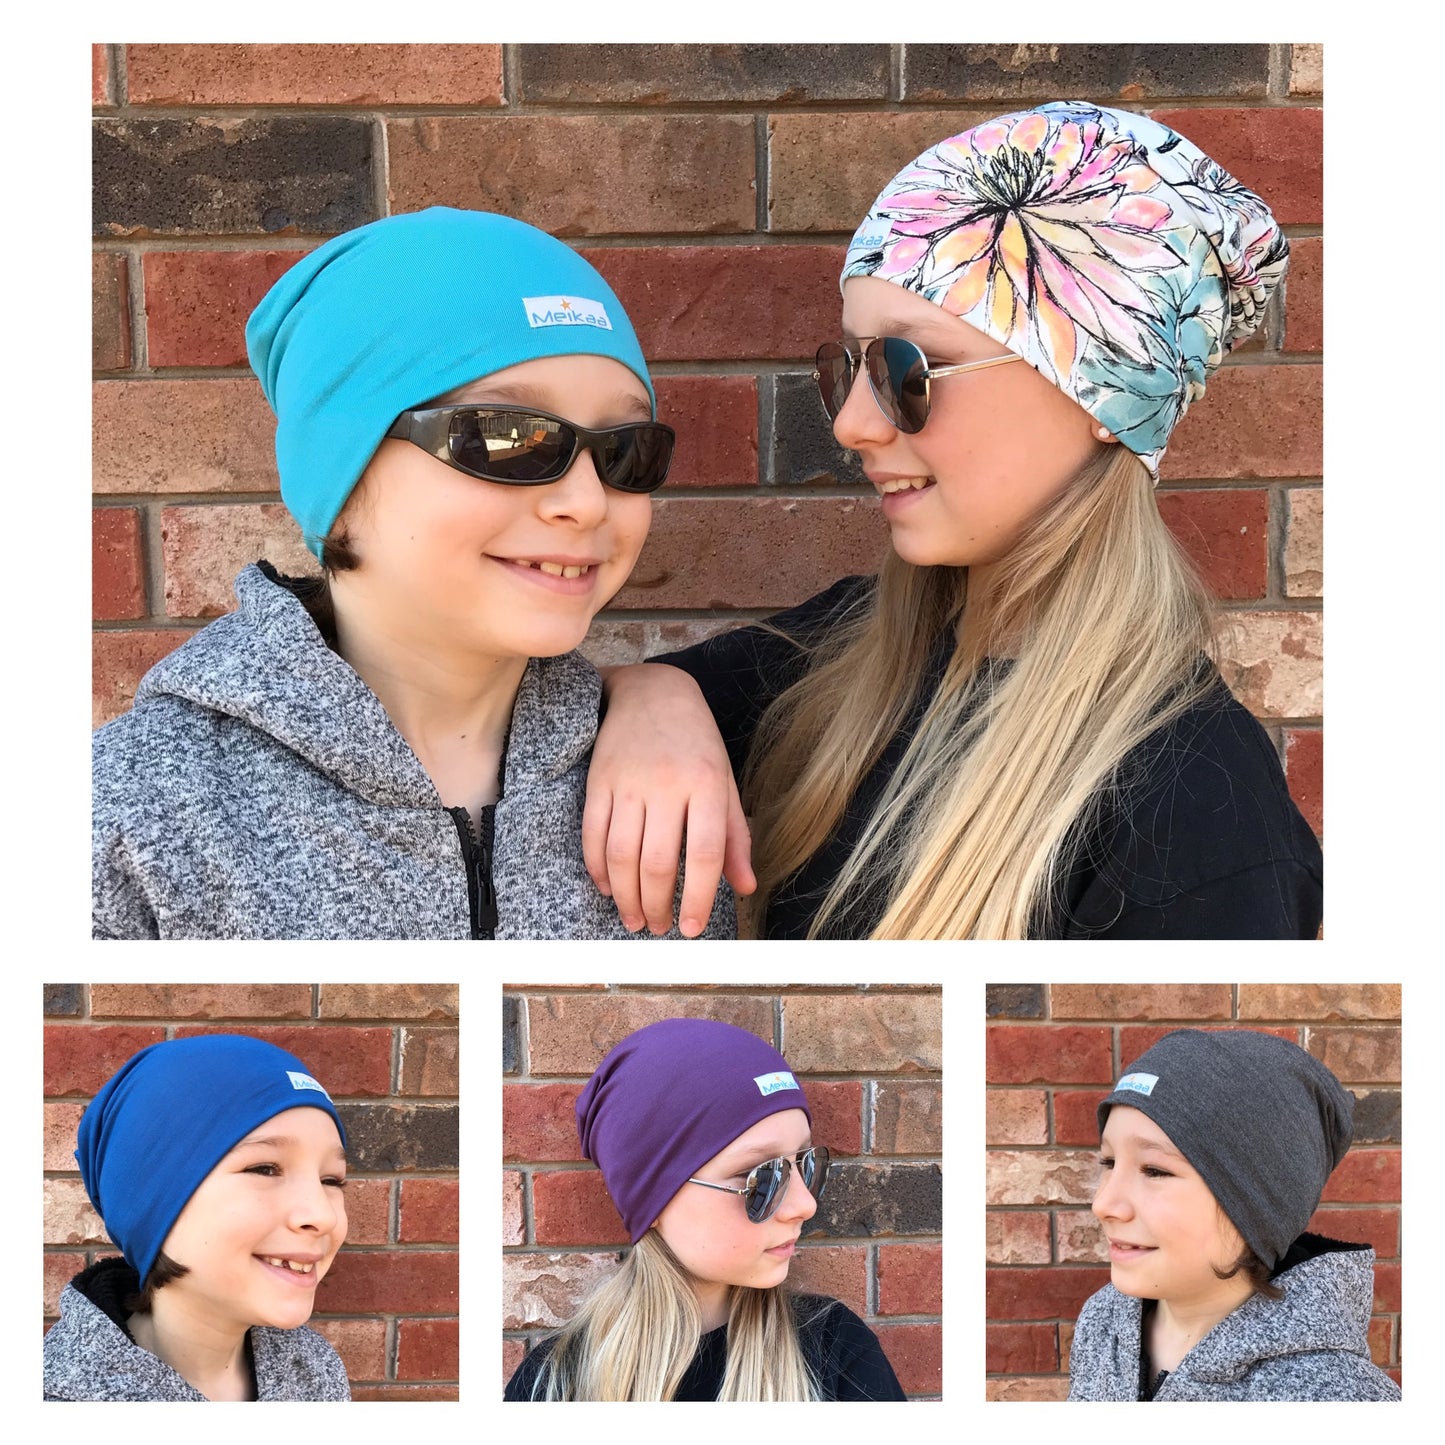 Orangeville Tigers Spring/Fall Bamboo Beanie Hats - Slouchy hats